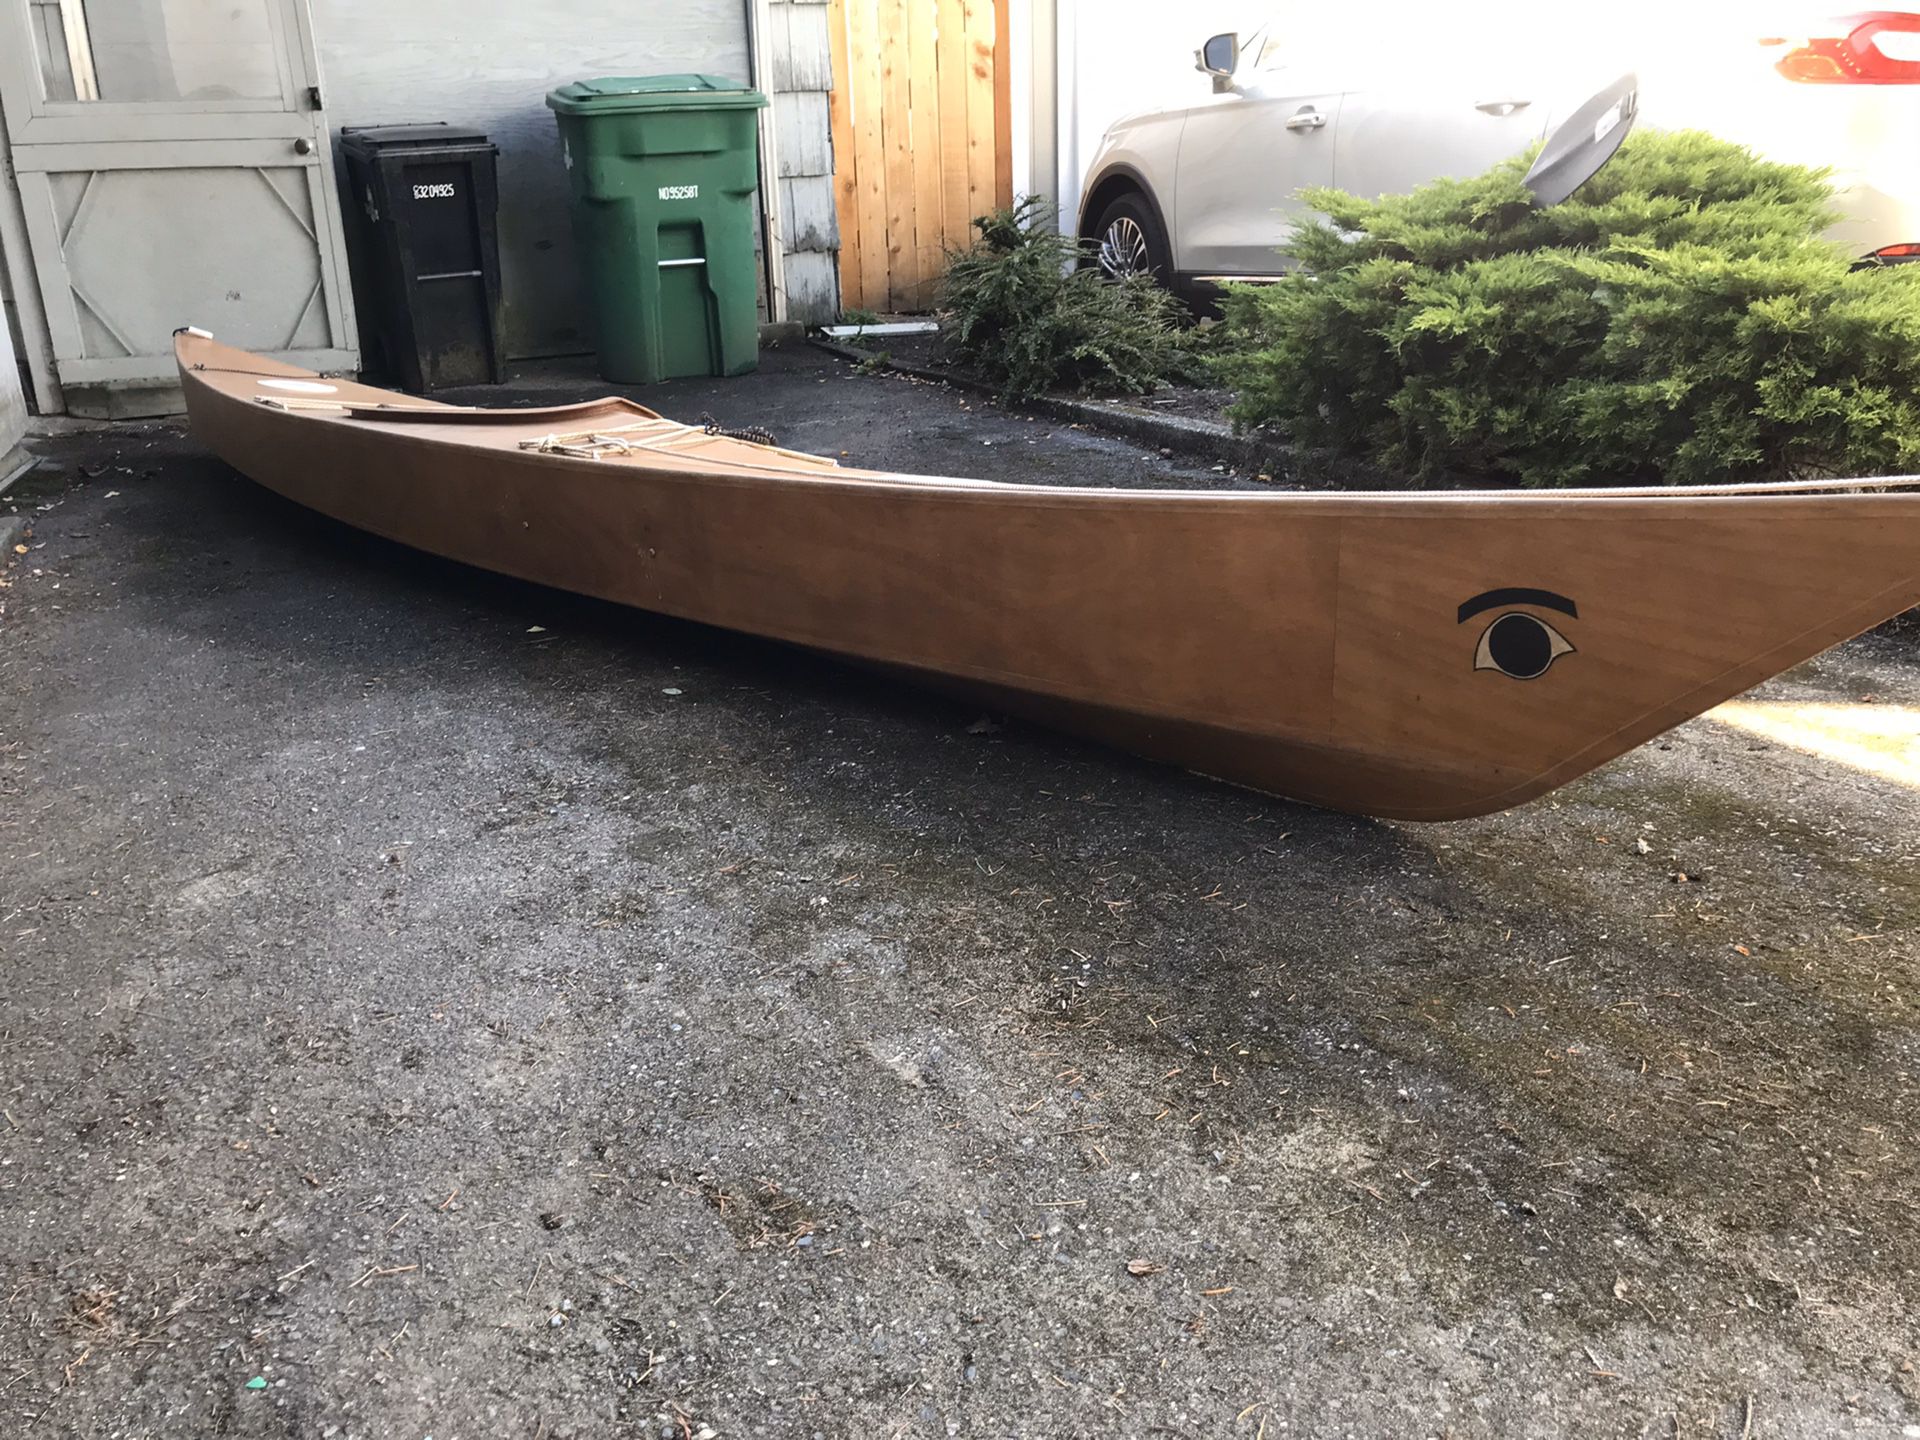 Pygmy Boats Kayak - Maybe model Queen Charlotte